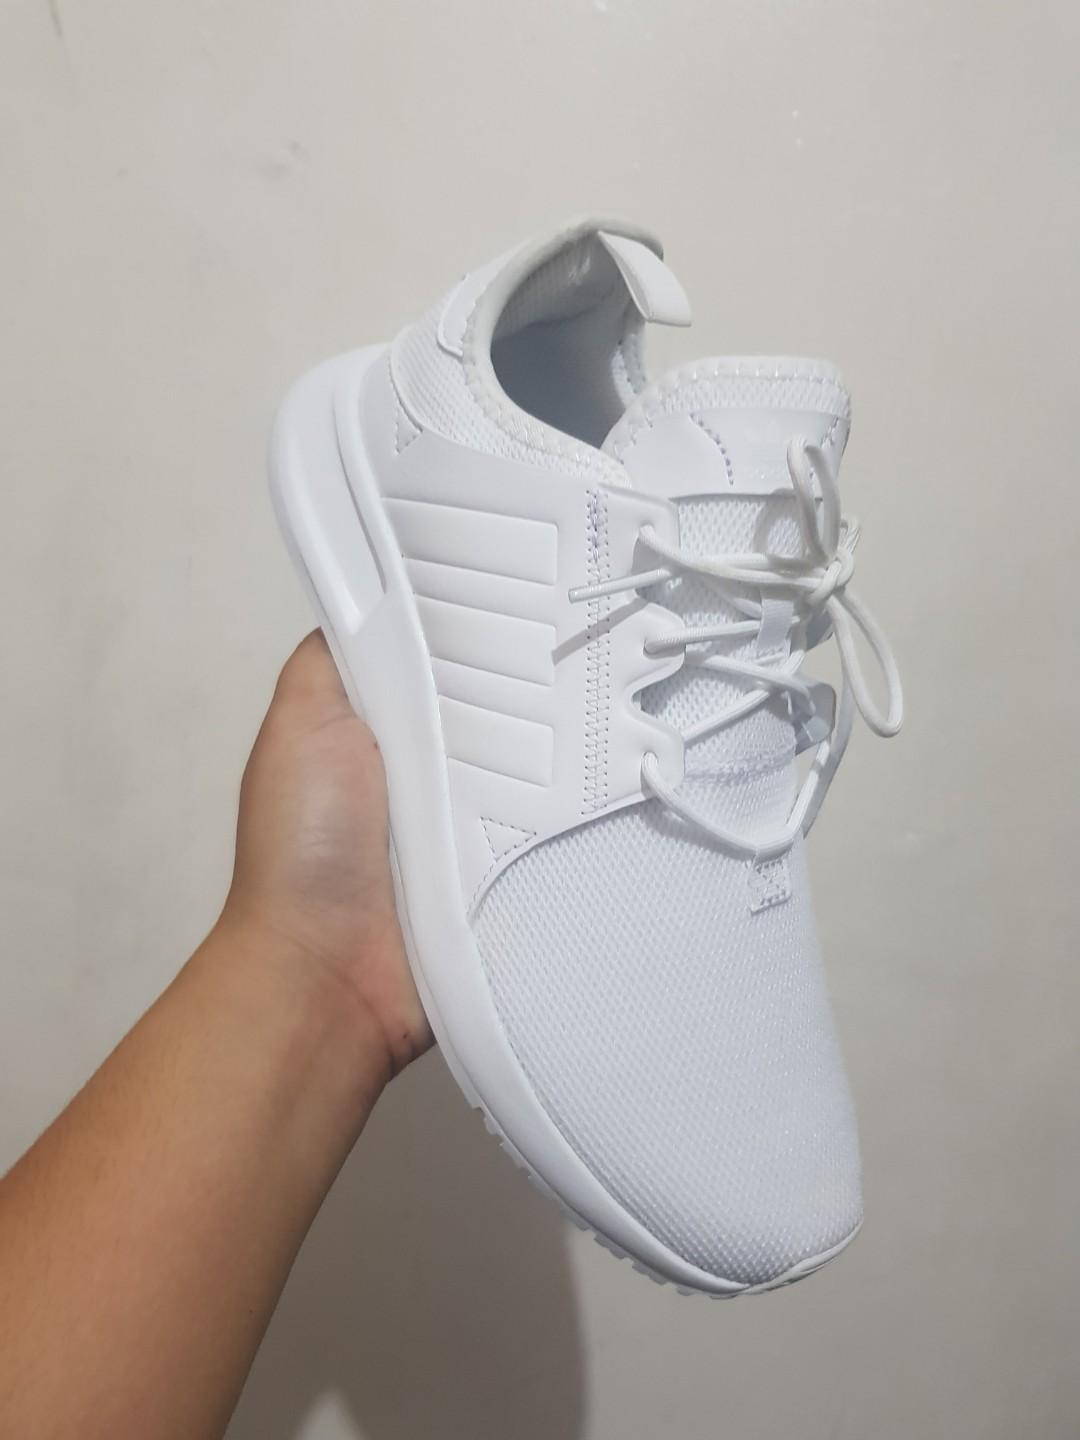 Adidas Shoes for Women (White) ORIGINAL, Women's Fashion, Footwear, Sneakers  on Carousell